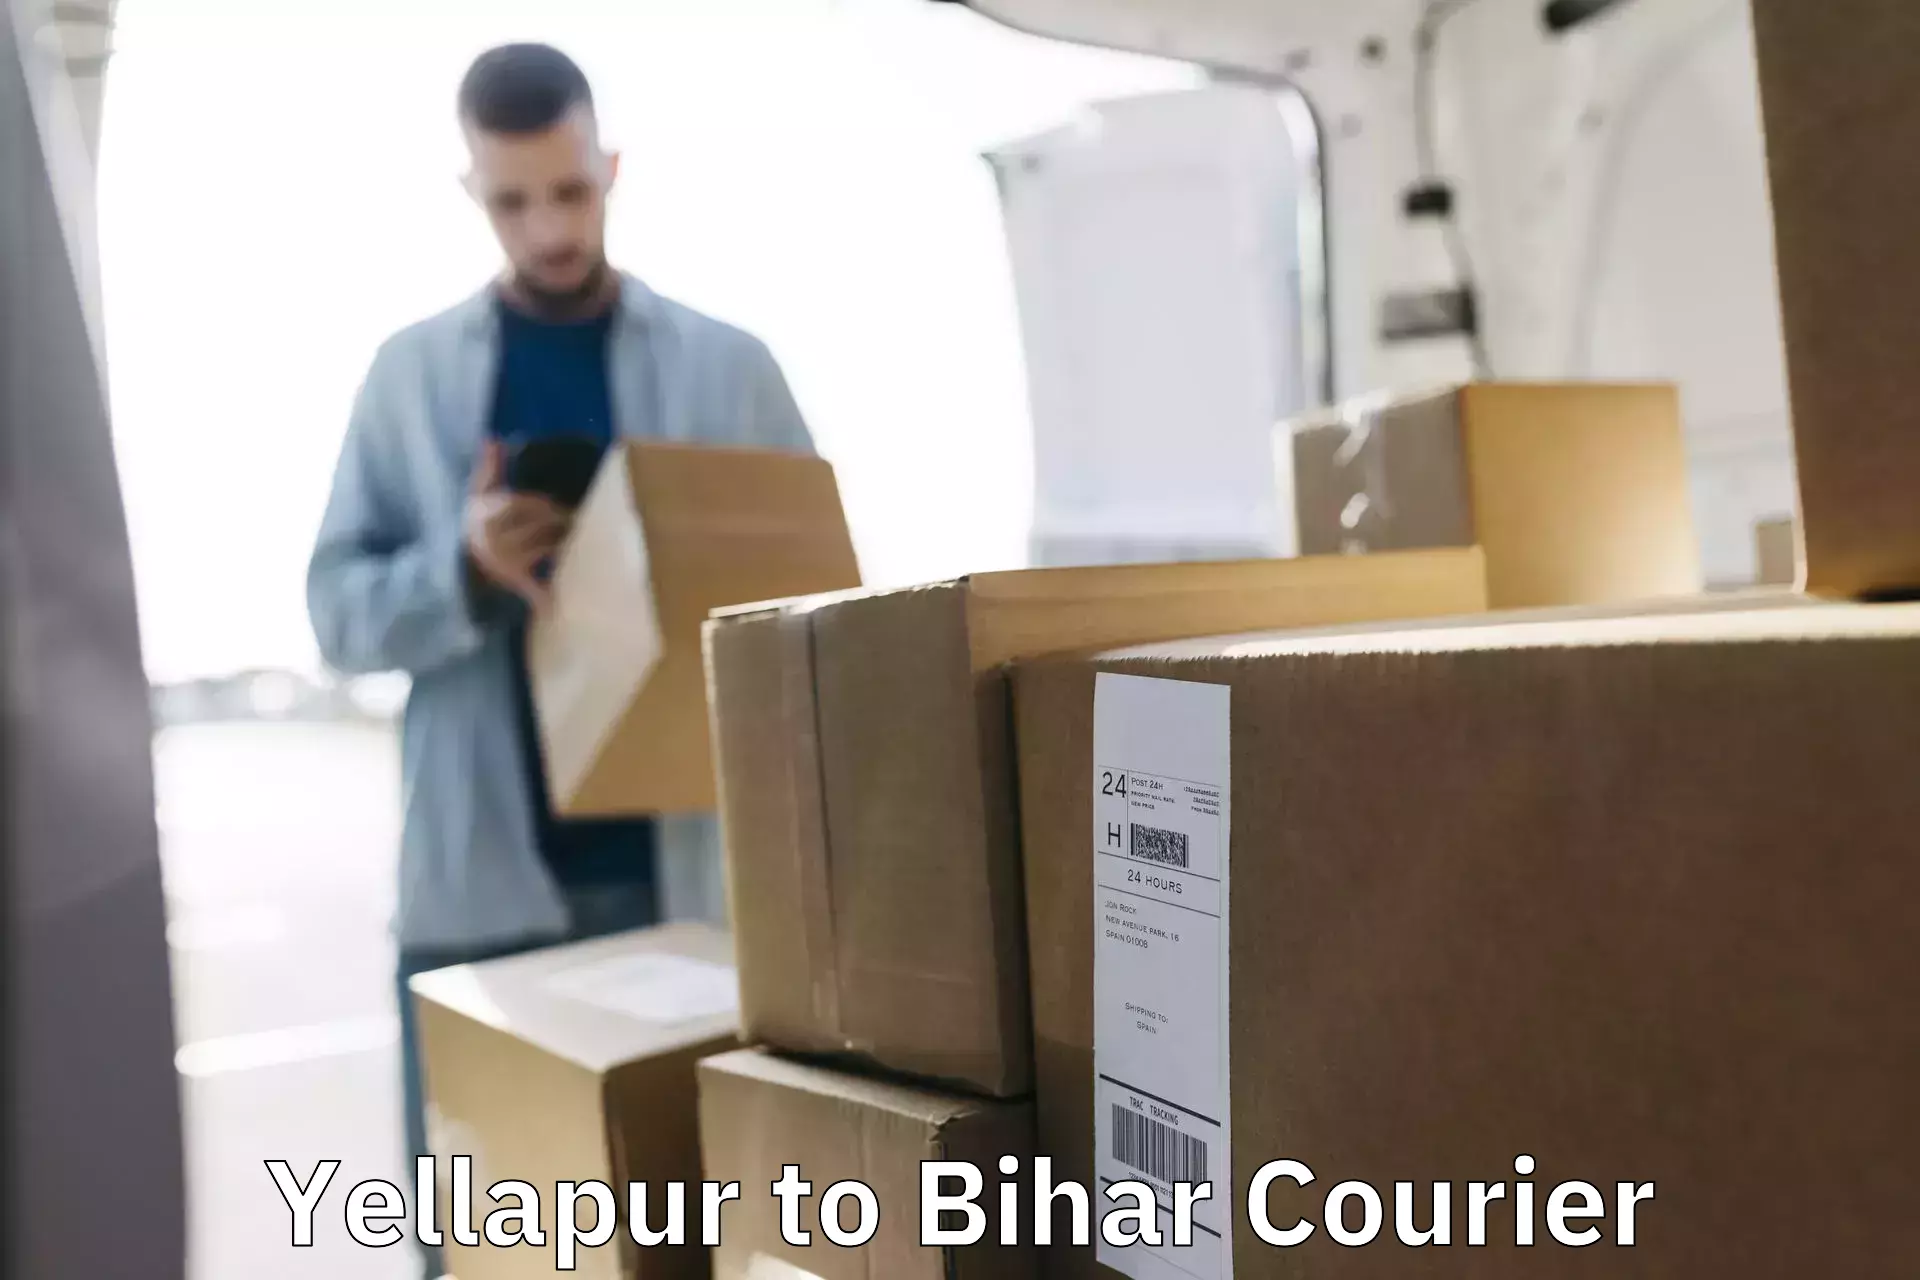 State-of-the-art courier technology Yellapur to Raxaul